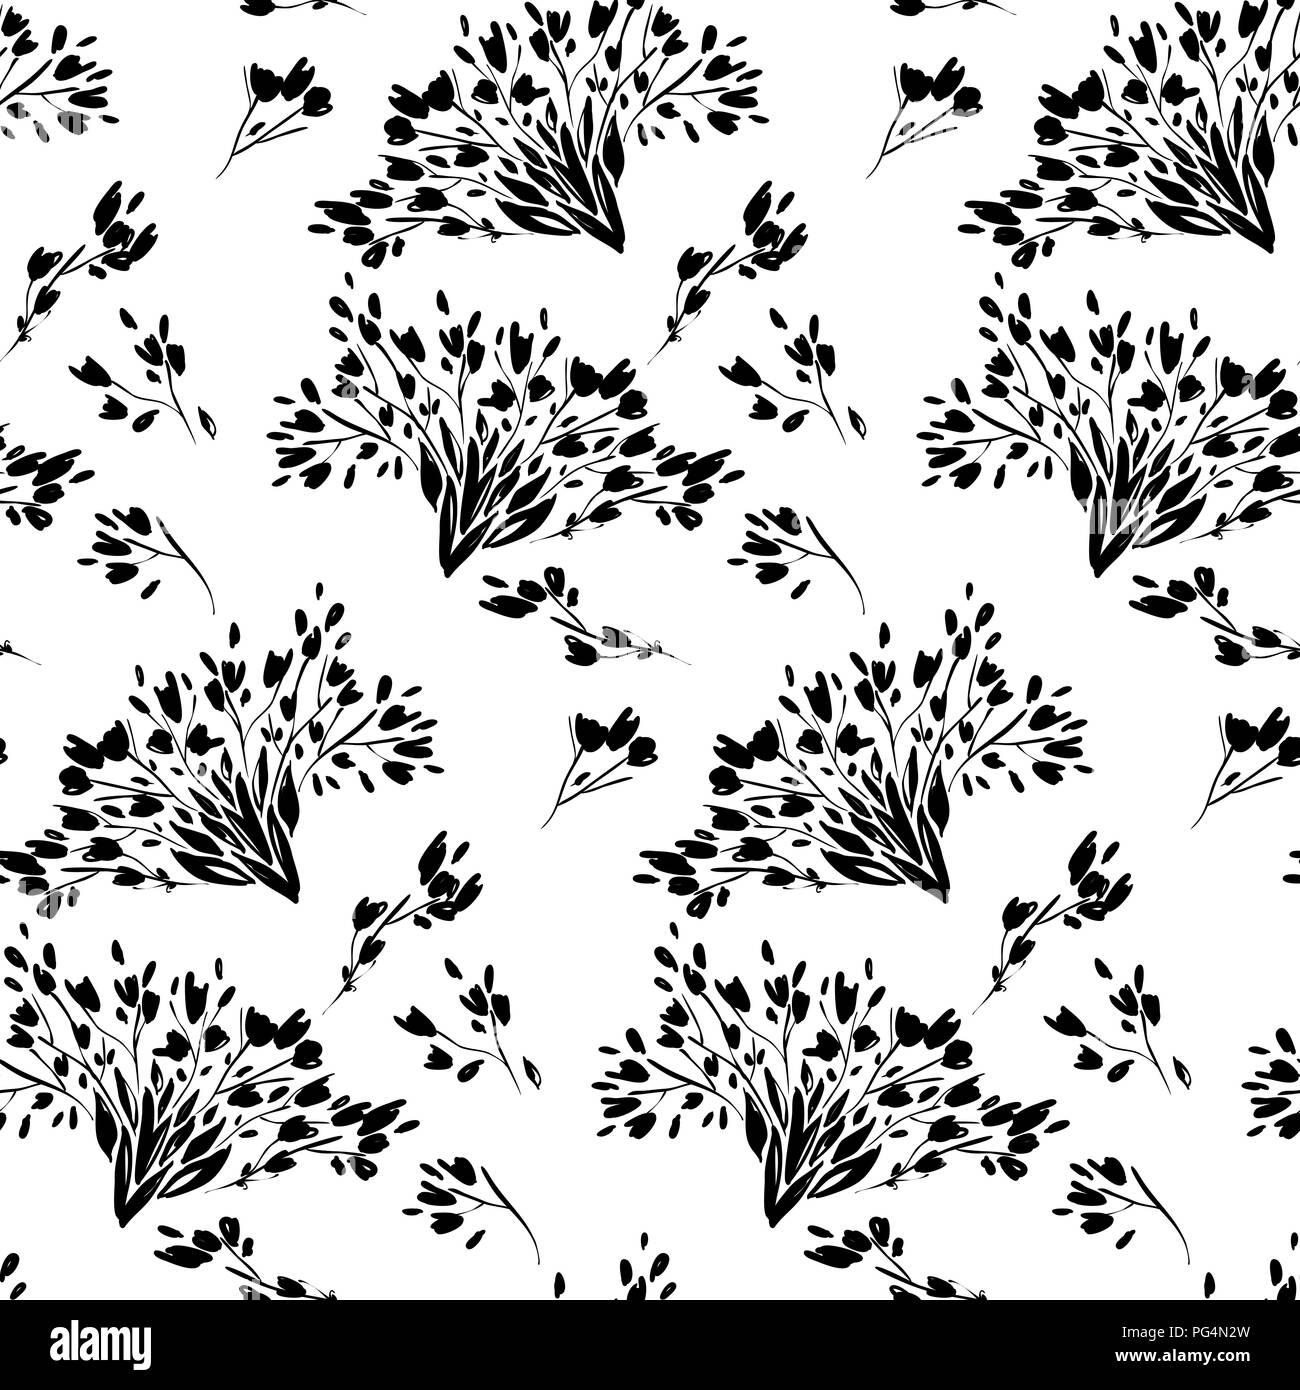 Floral seamless pattern with different flowers and leaves. Botanical illustration  hand painted. Textile print, fabric swatch, wrapping paper. Stock Vector